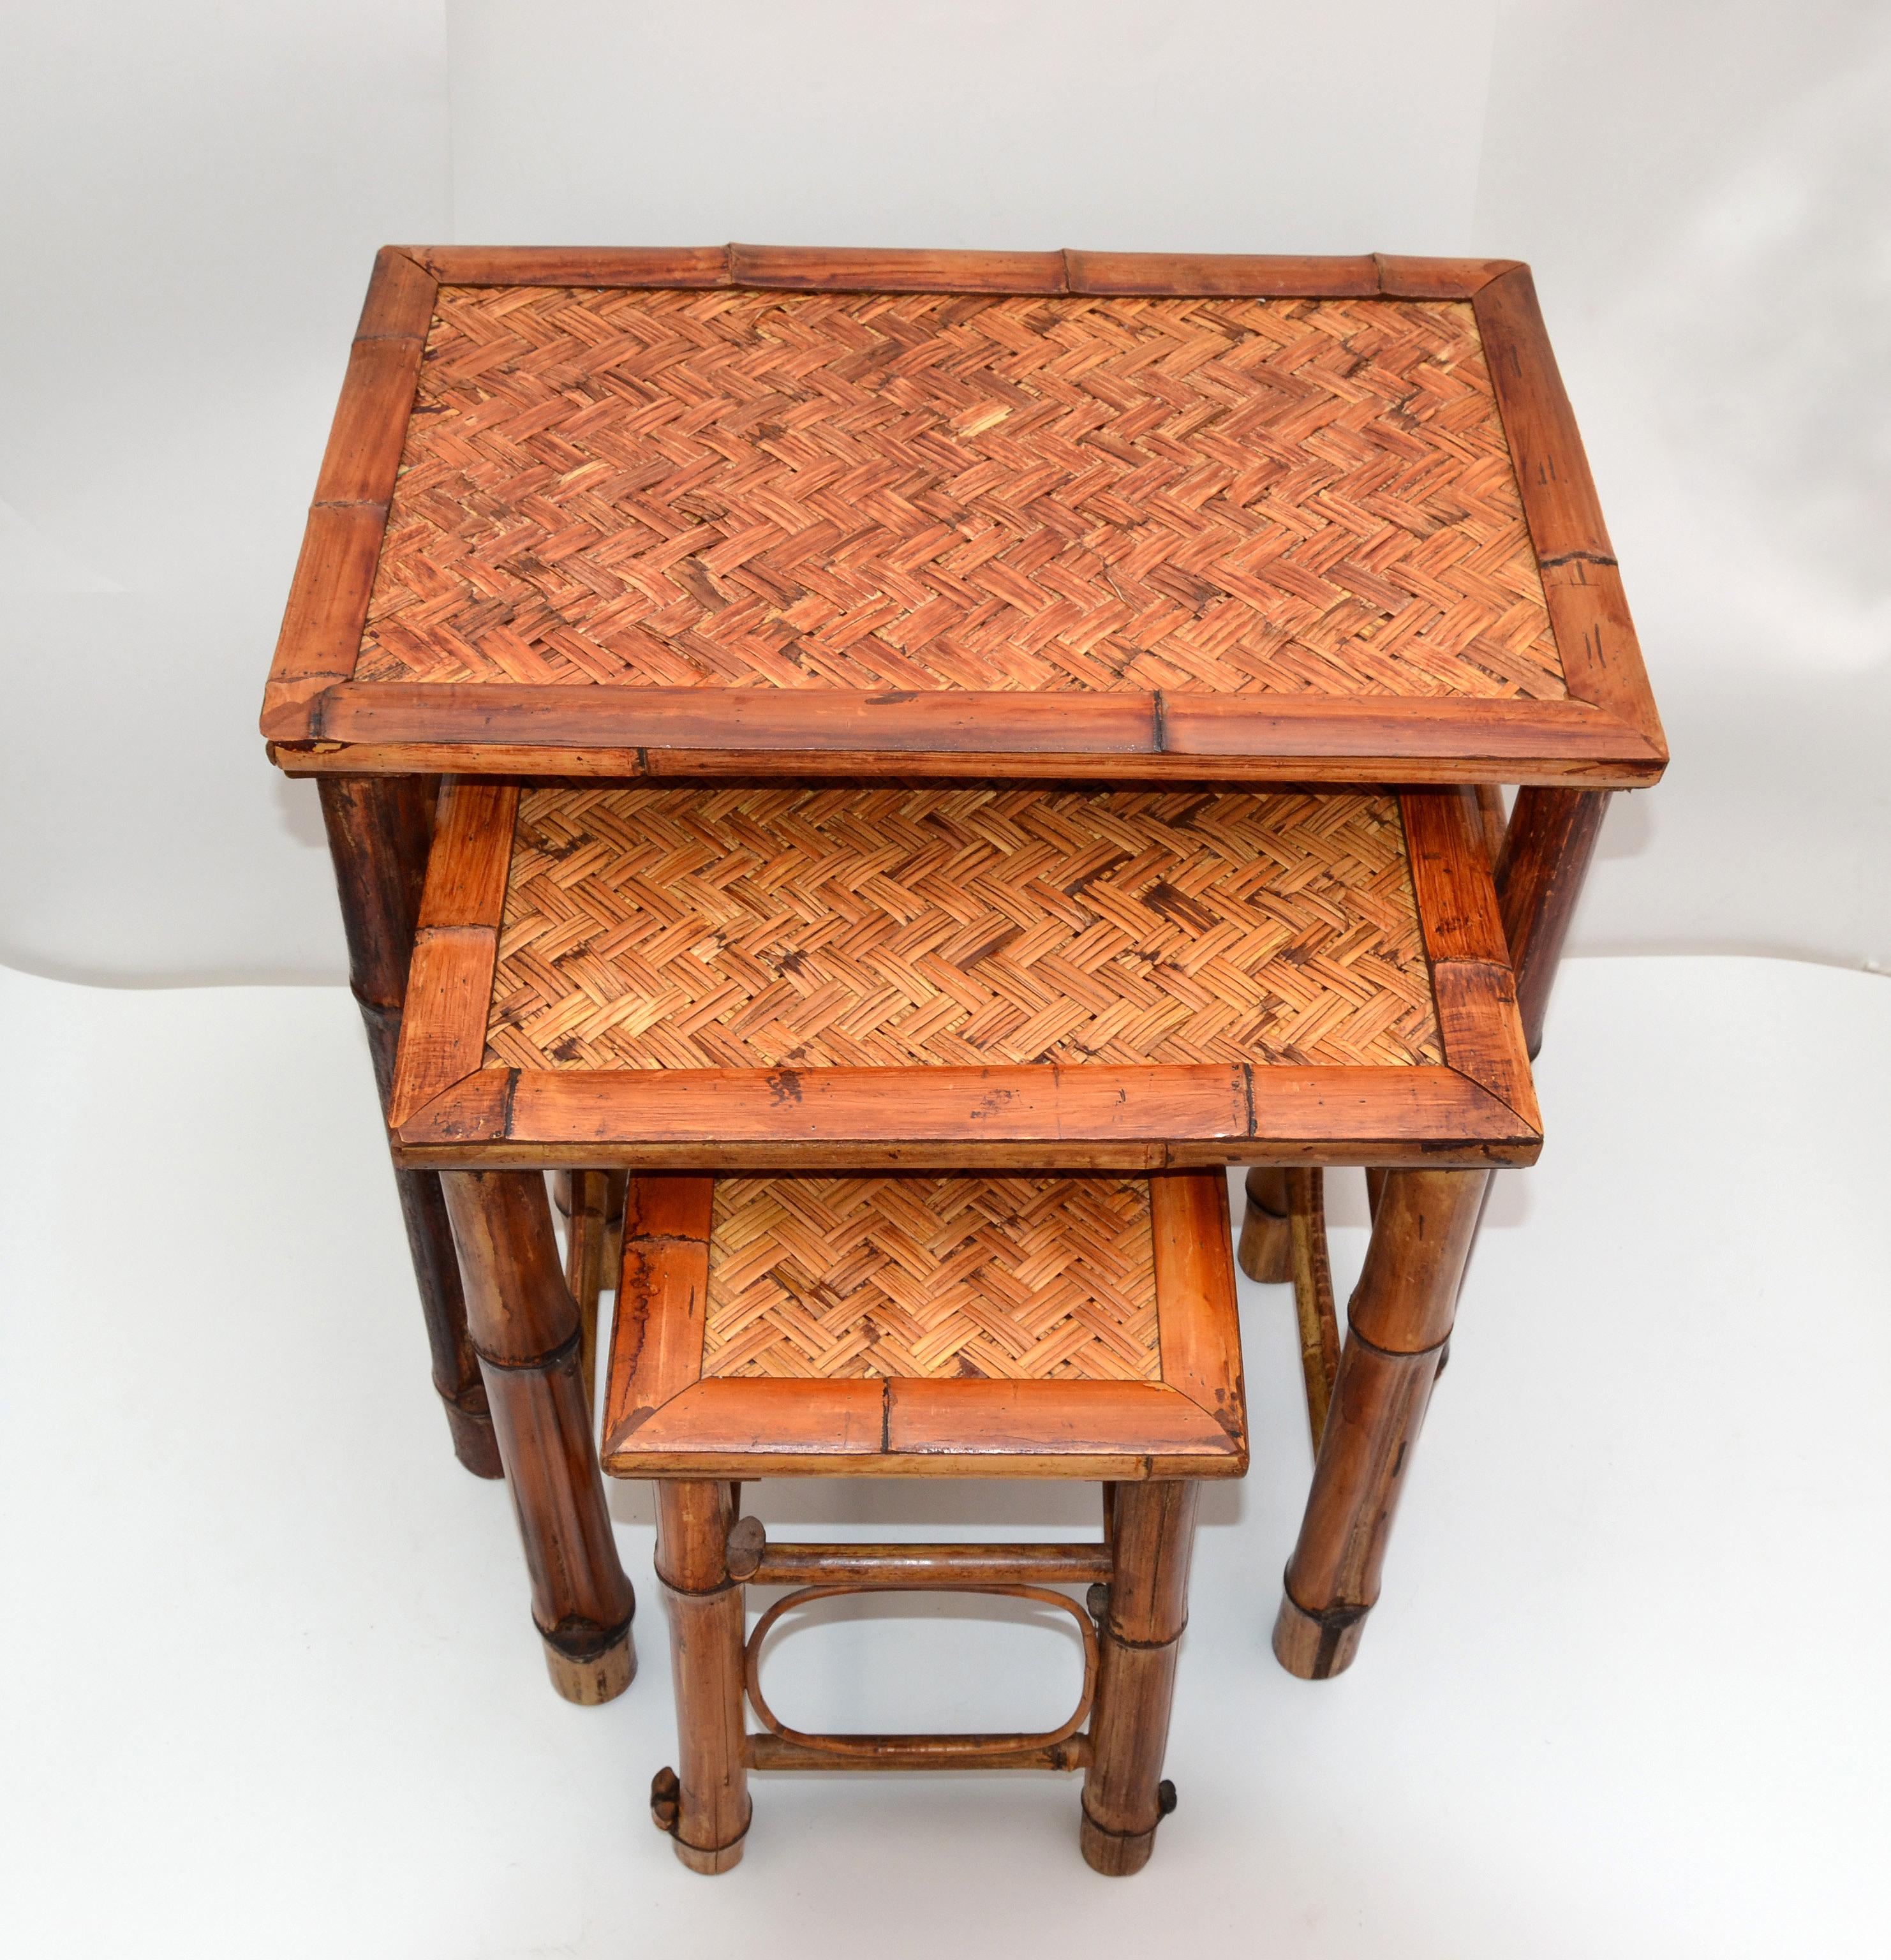 Hand-Crafted Chinoiserie Bamboo & Cane Nesting Tables Stacking Tables Handcrafted Set of 3 For Sale